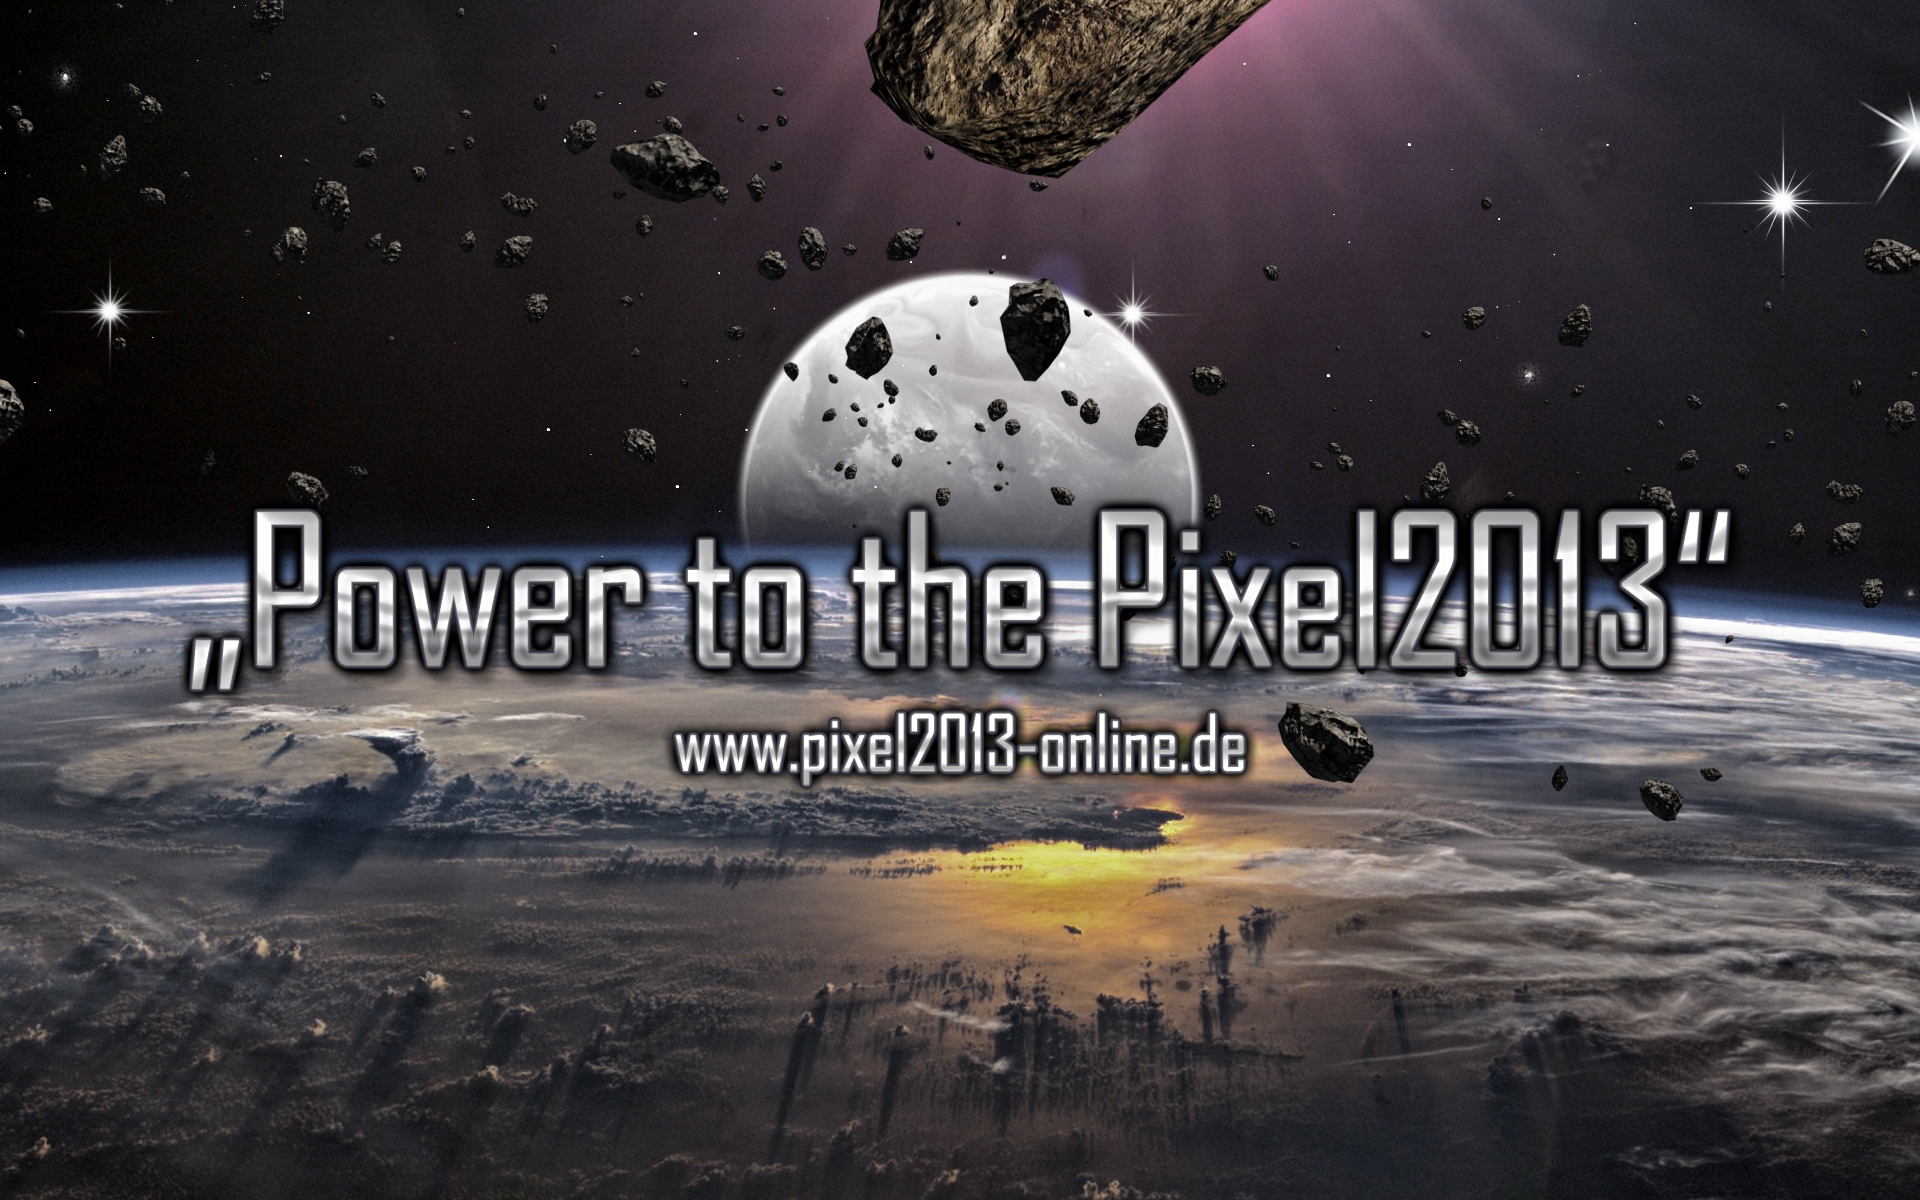 2846_Power_to_the_Pixel2013.jpg